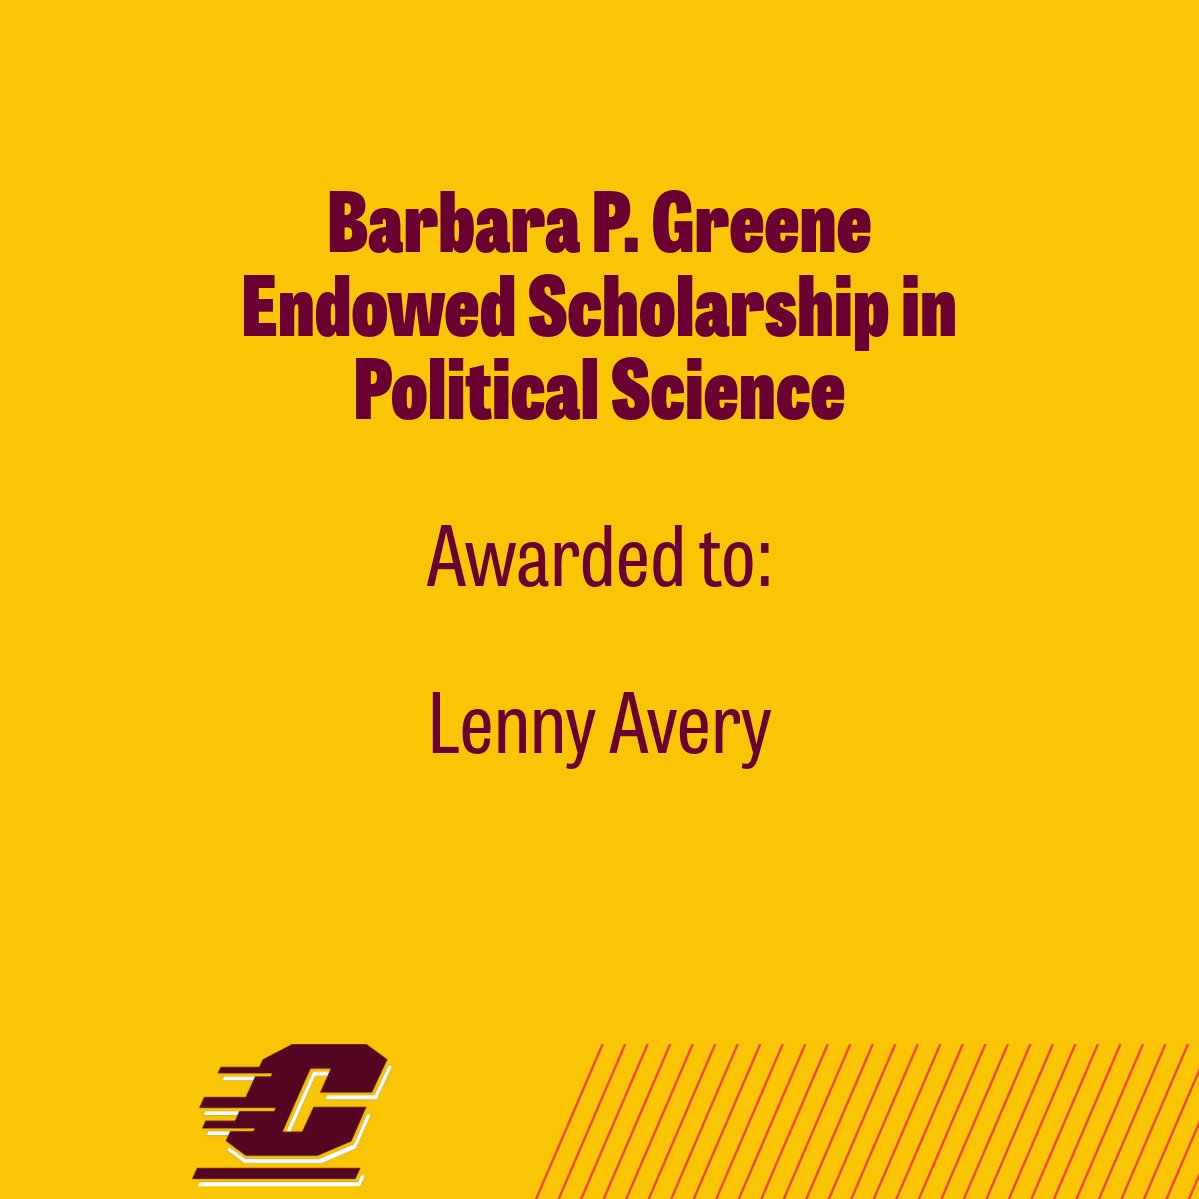 Congratulations to Liz Fancon, Libby Jackson, Abby Terhune and Lenny Avery for receiving a scholarship from The School of Politics, Society, Justice and Public Service.
#PoliticalScience #Sociology #PublicAdministration #SocialWork